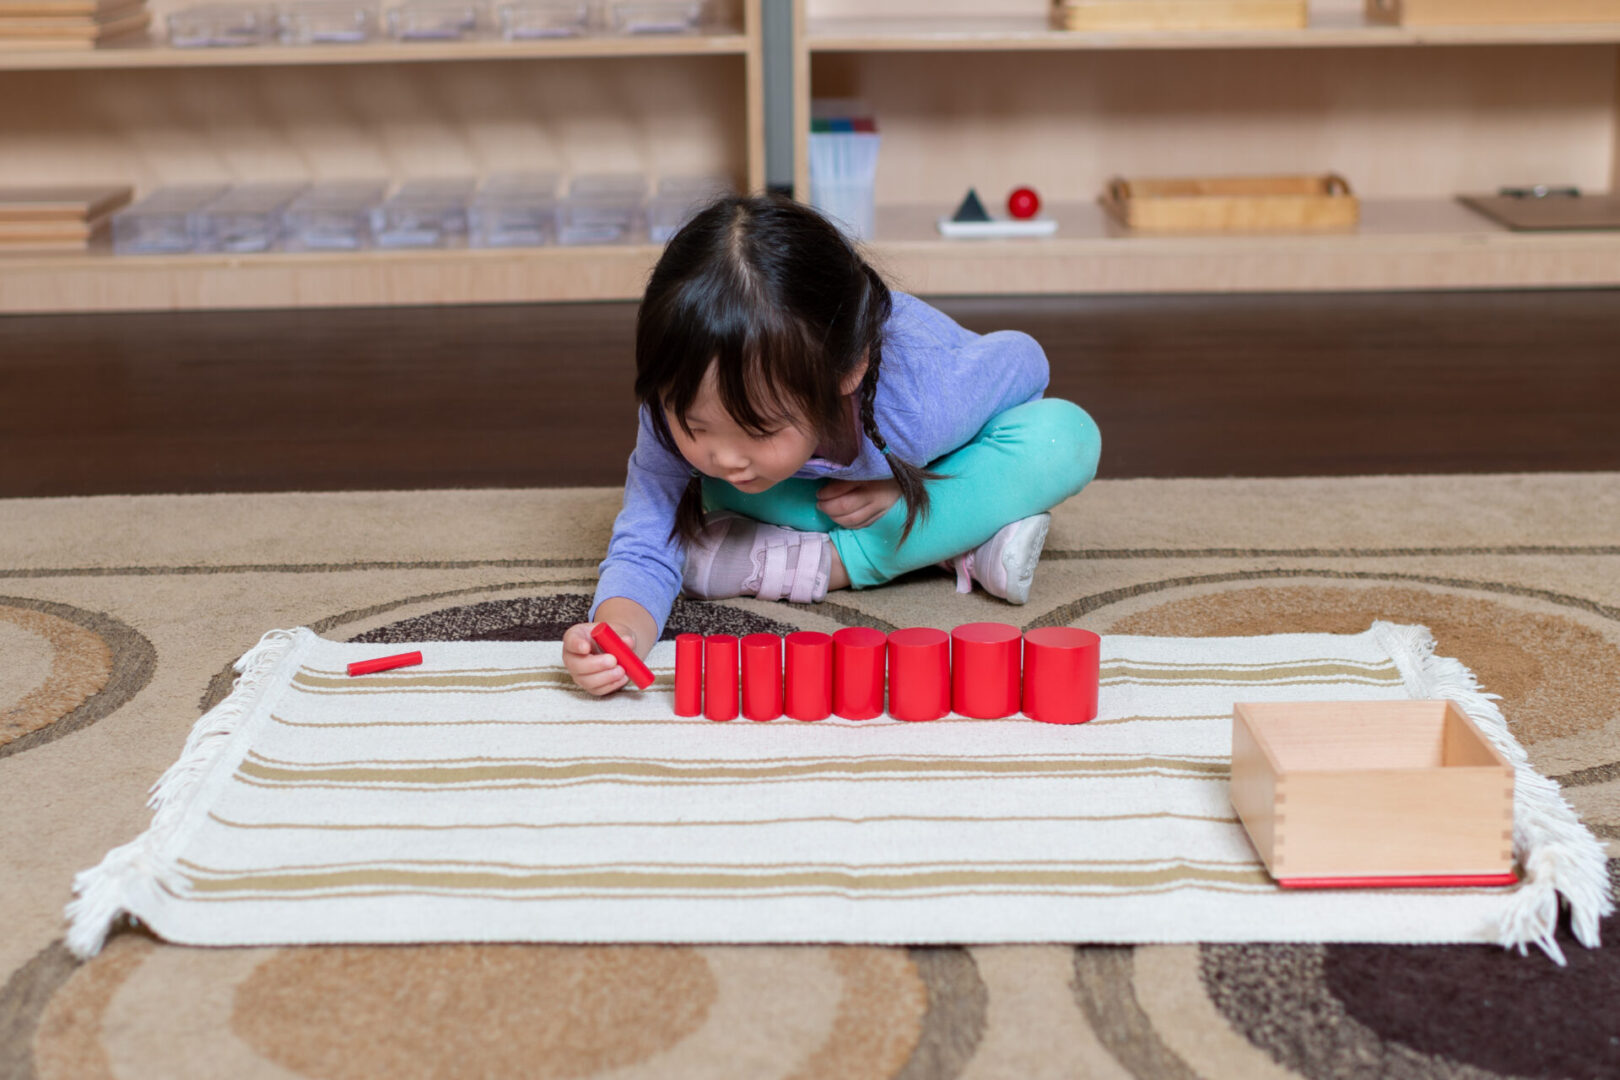 A girl in braids arranging red wooden pieces by their size